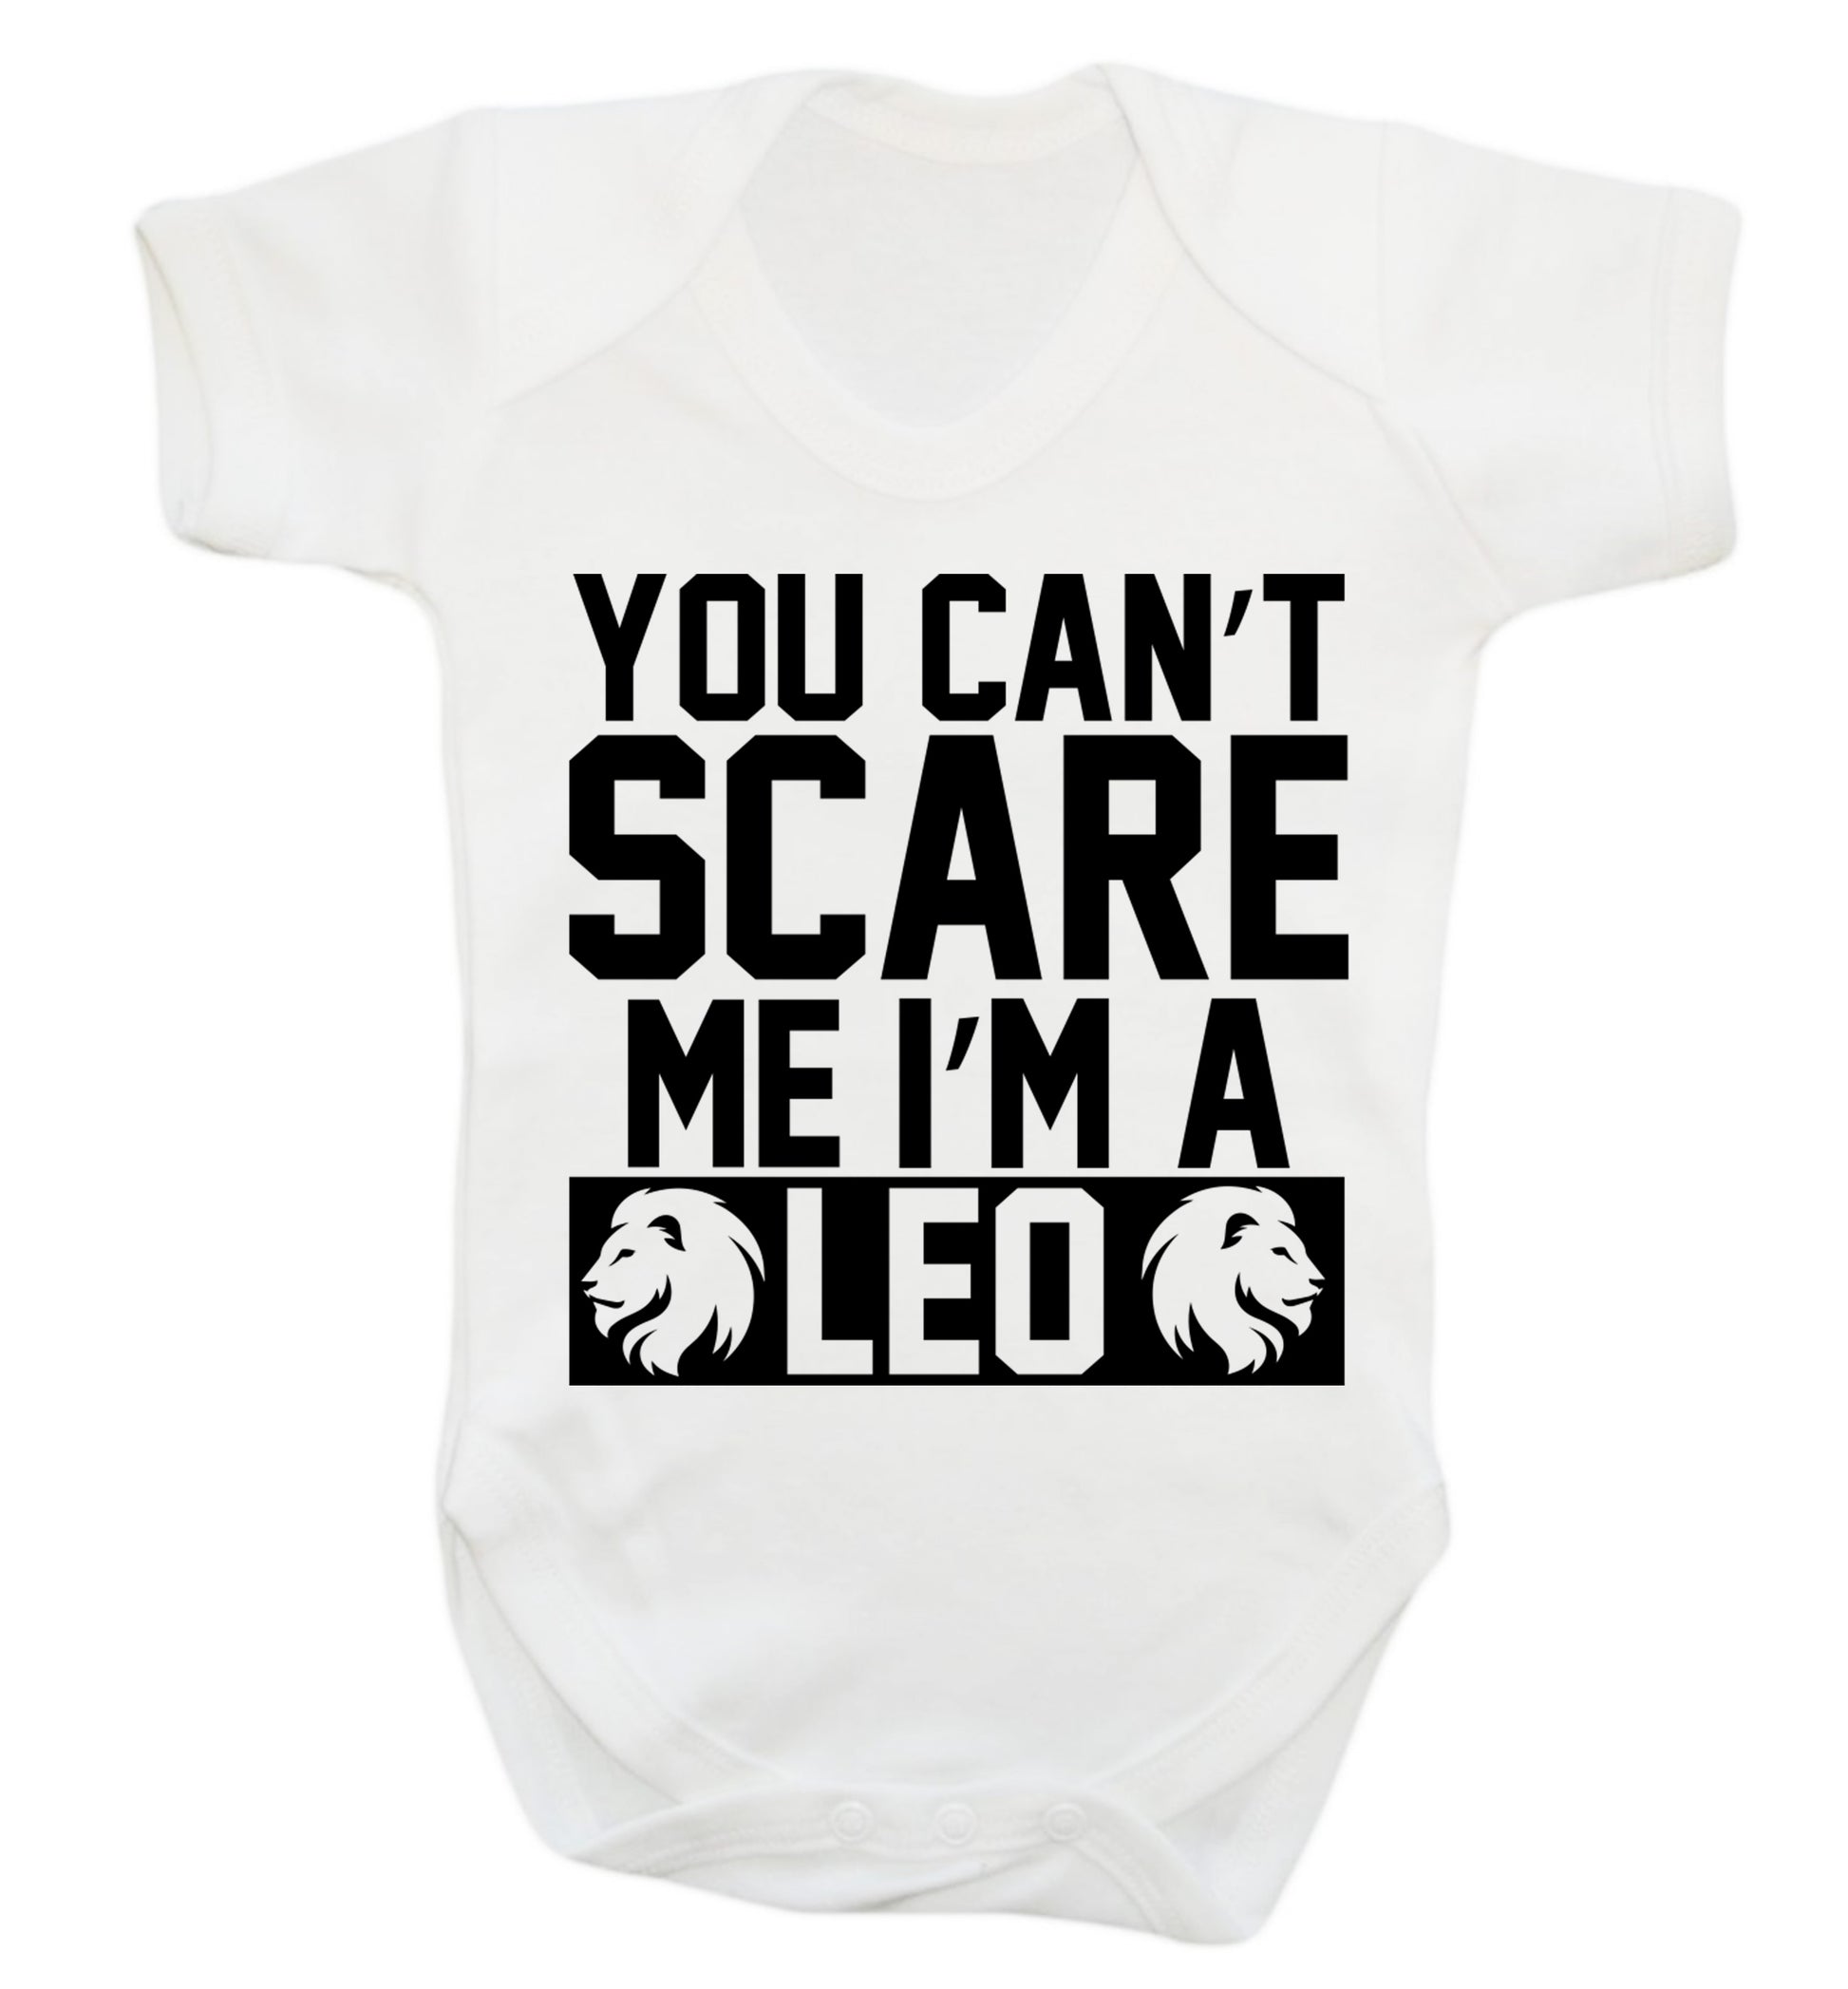 You can't scare me I'm a leo Baby Vest white 18-24 months